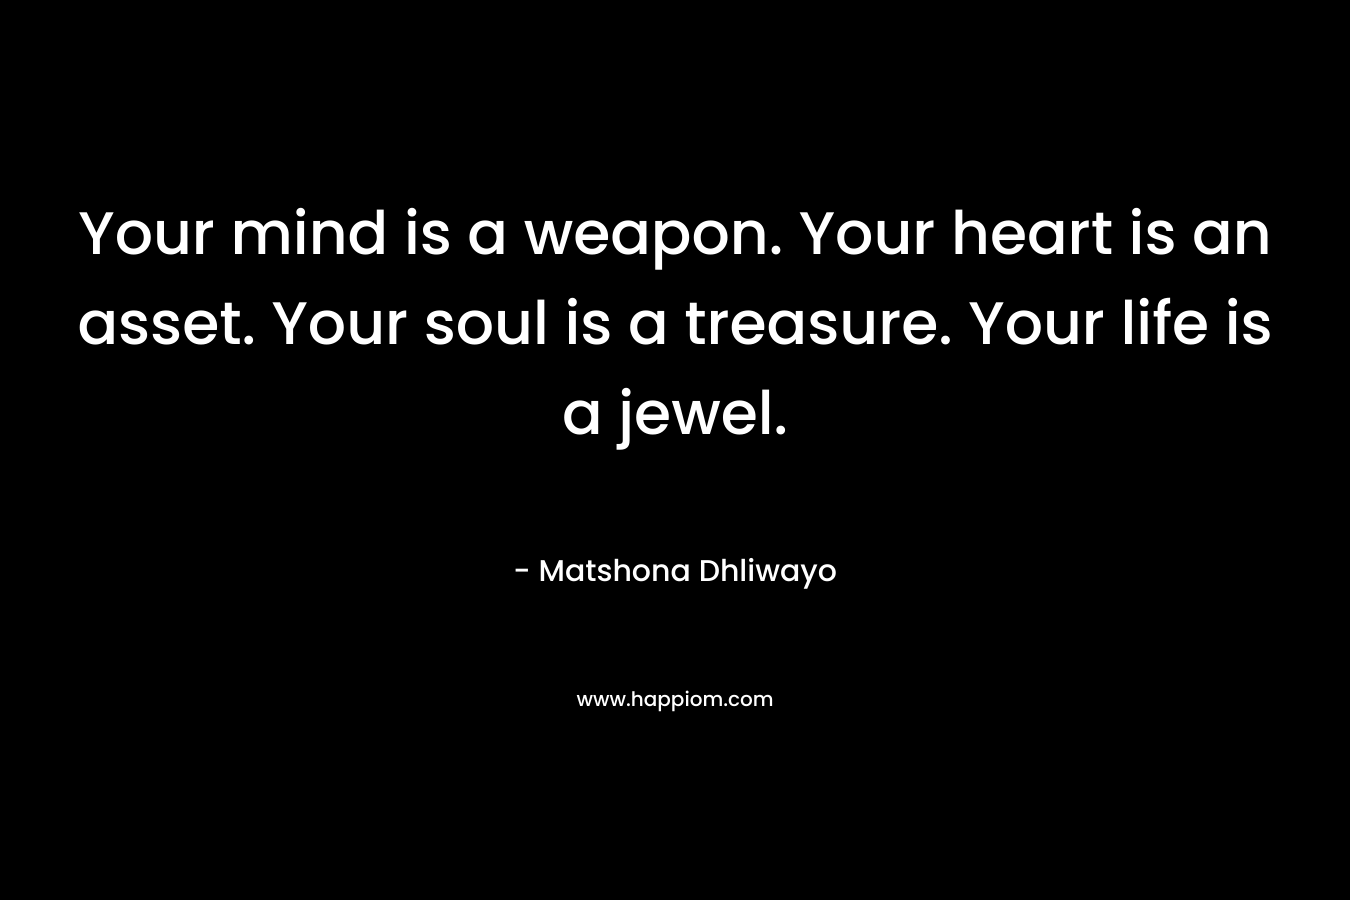 Your mind is a weapon. Your heart is an asset. Your soul is a treasure. Your life is a jewel.